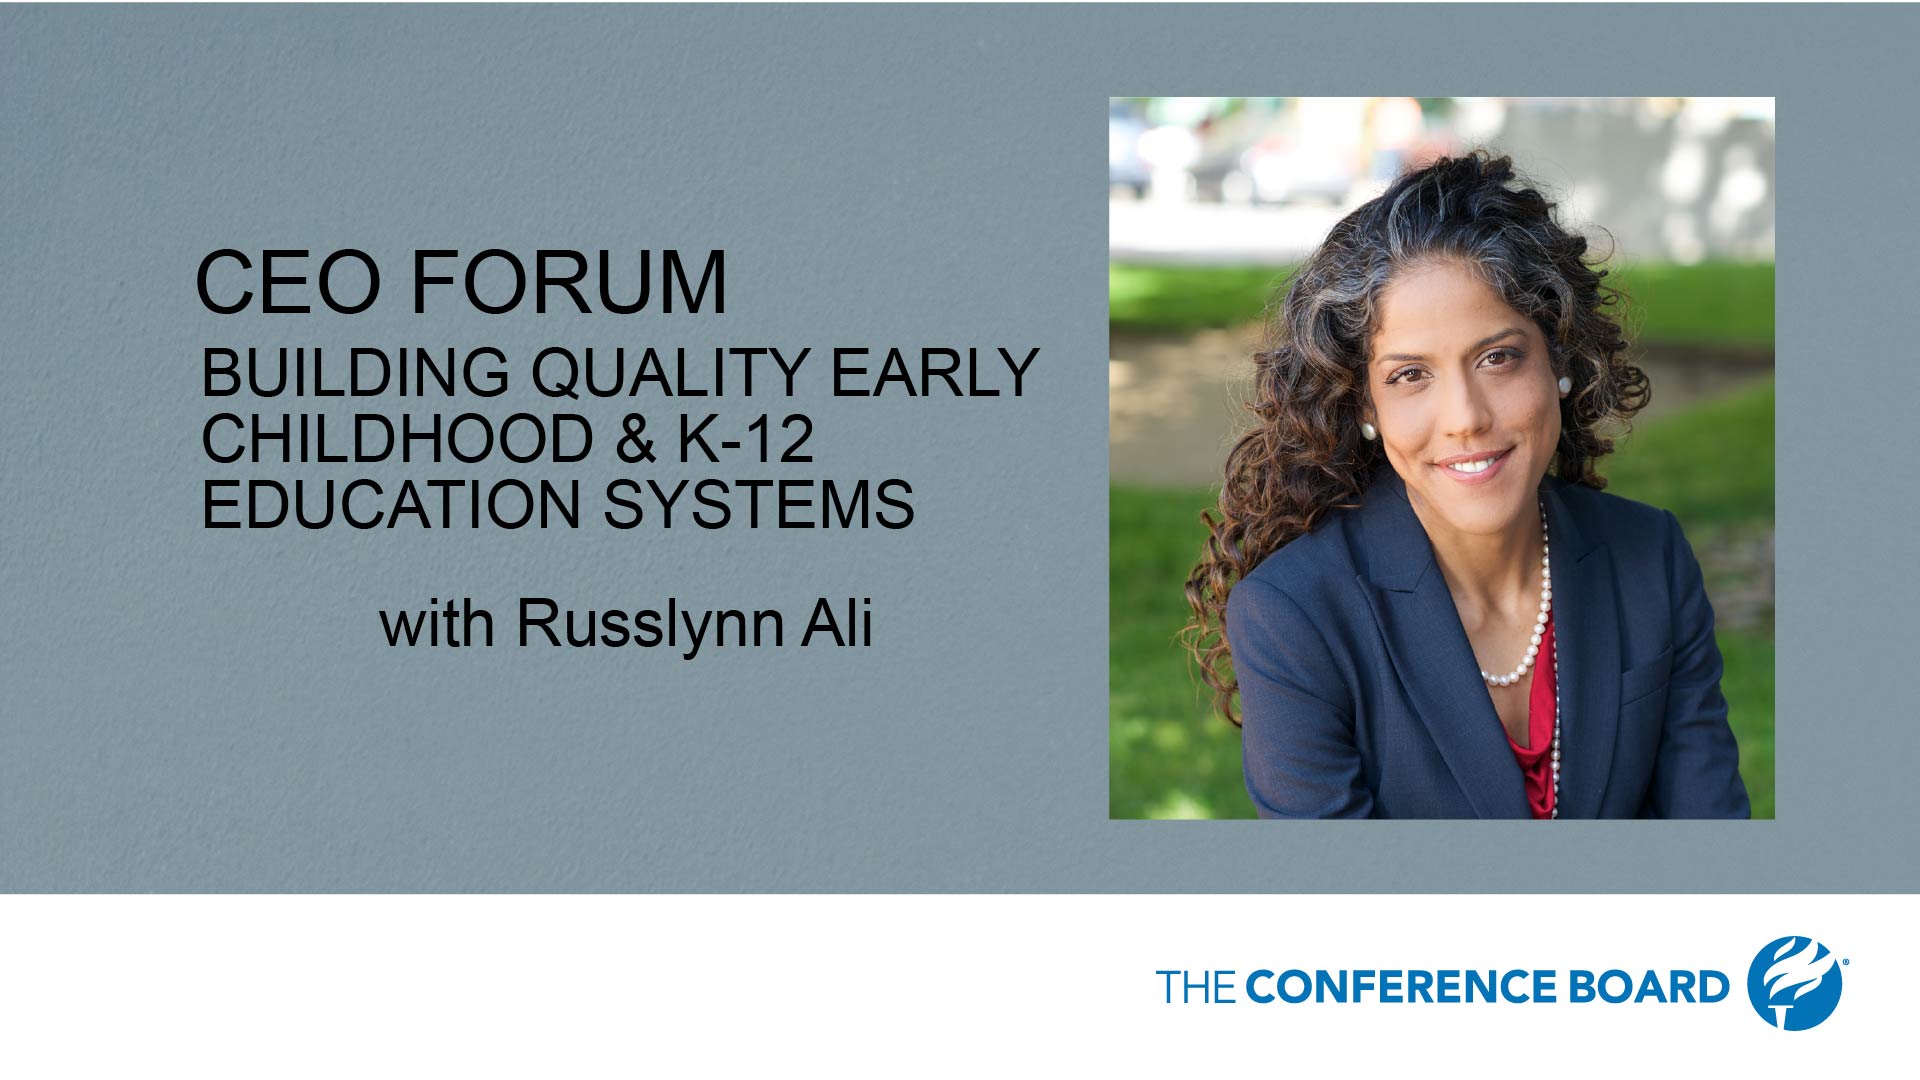 XQ Institute Co-Founder and CEO Russlynn Ali on Quality Education as the Fundamental Civil Rights Issue of this Generation